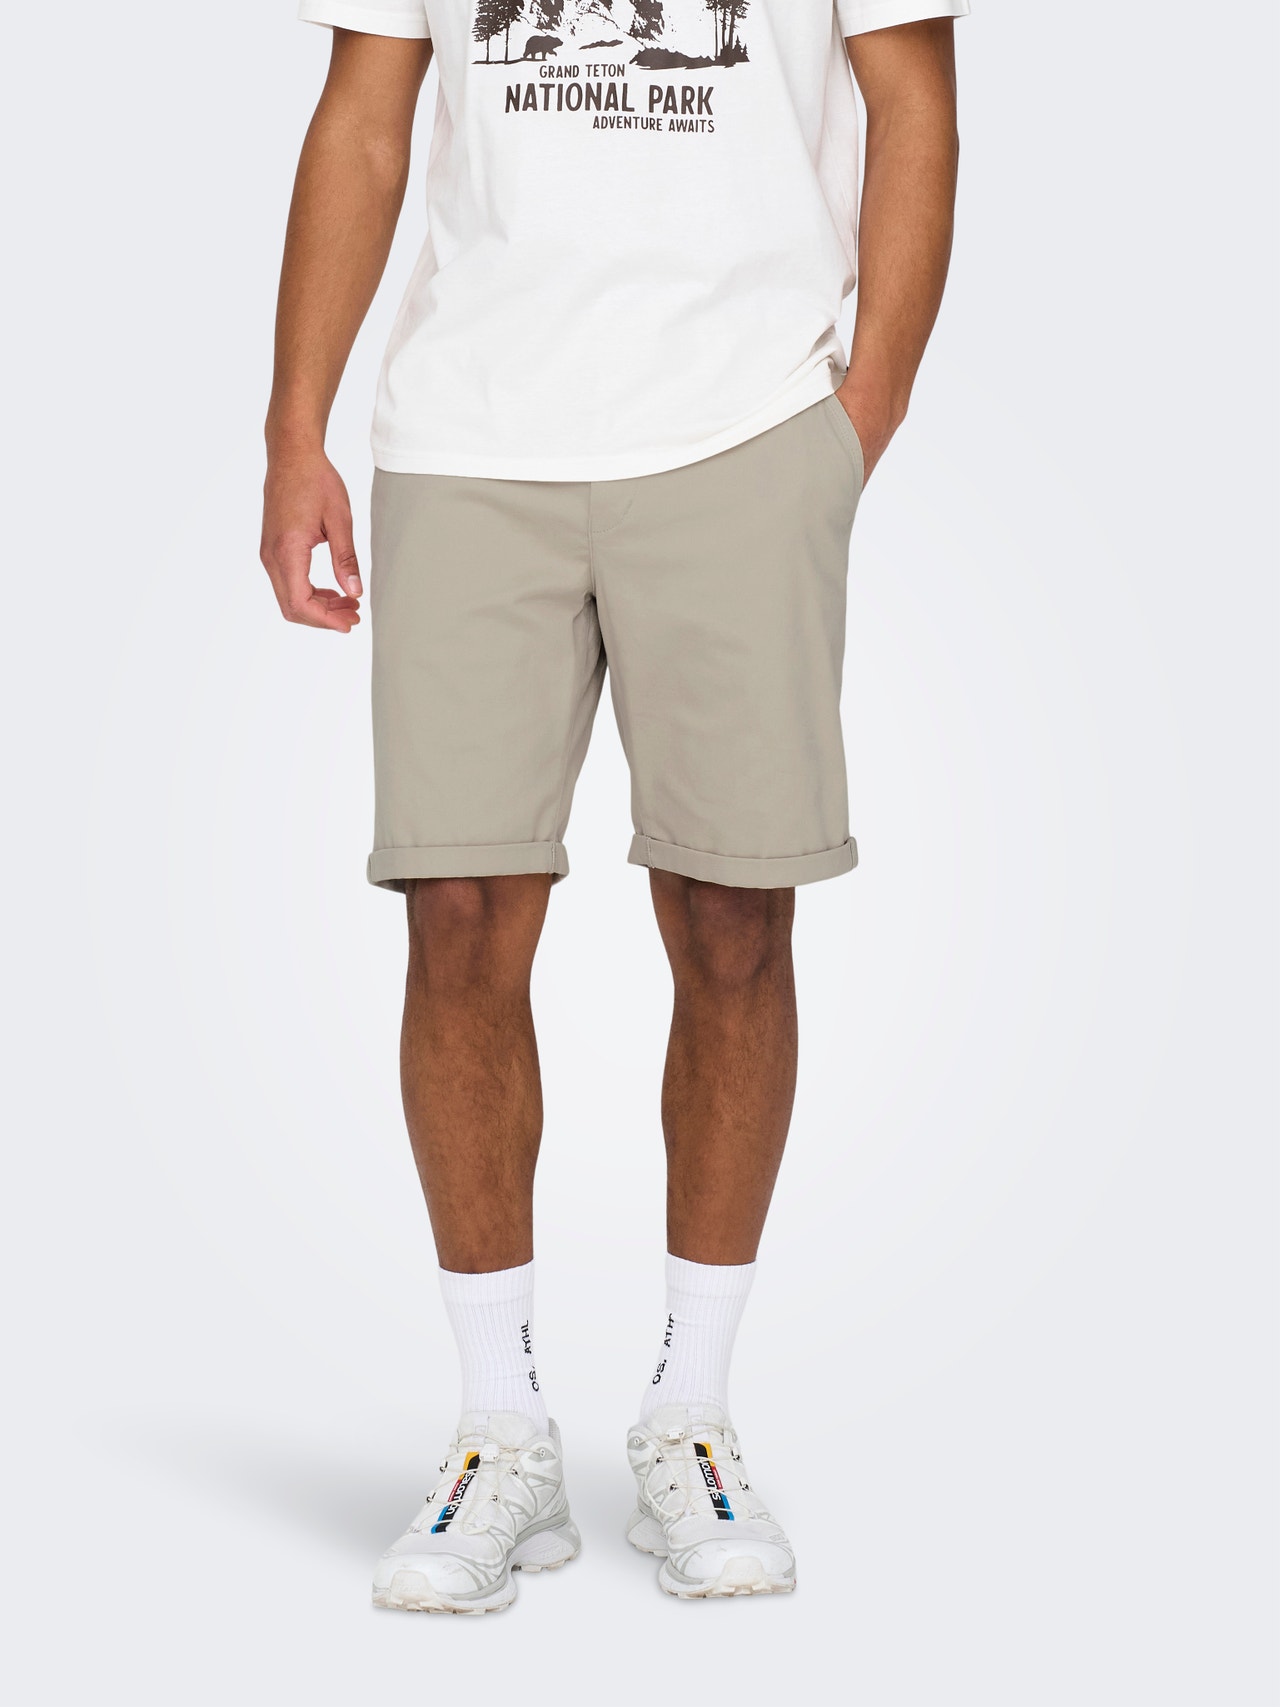 ONLY & SONS Shorts Corte regular -Silver Lining - 22027905